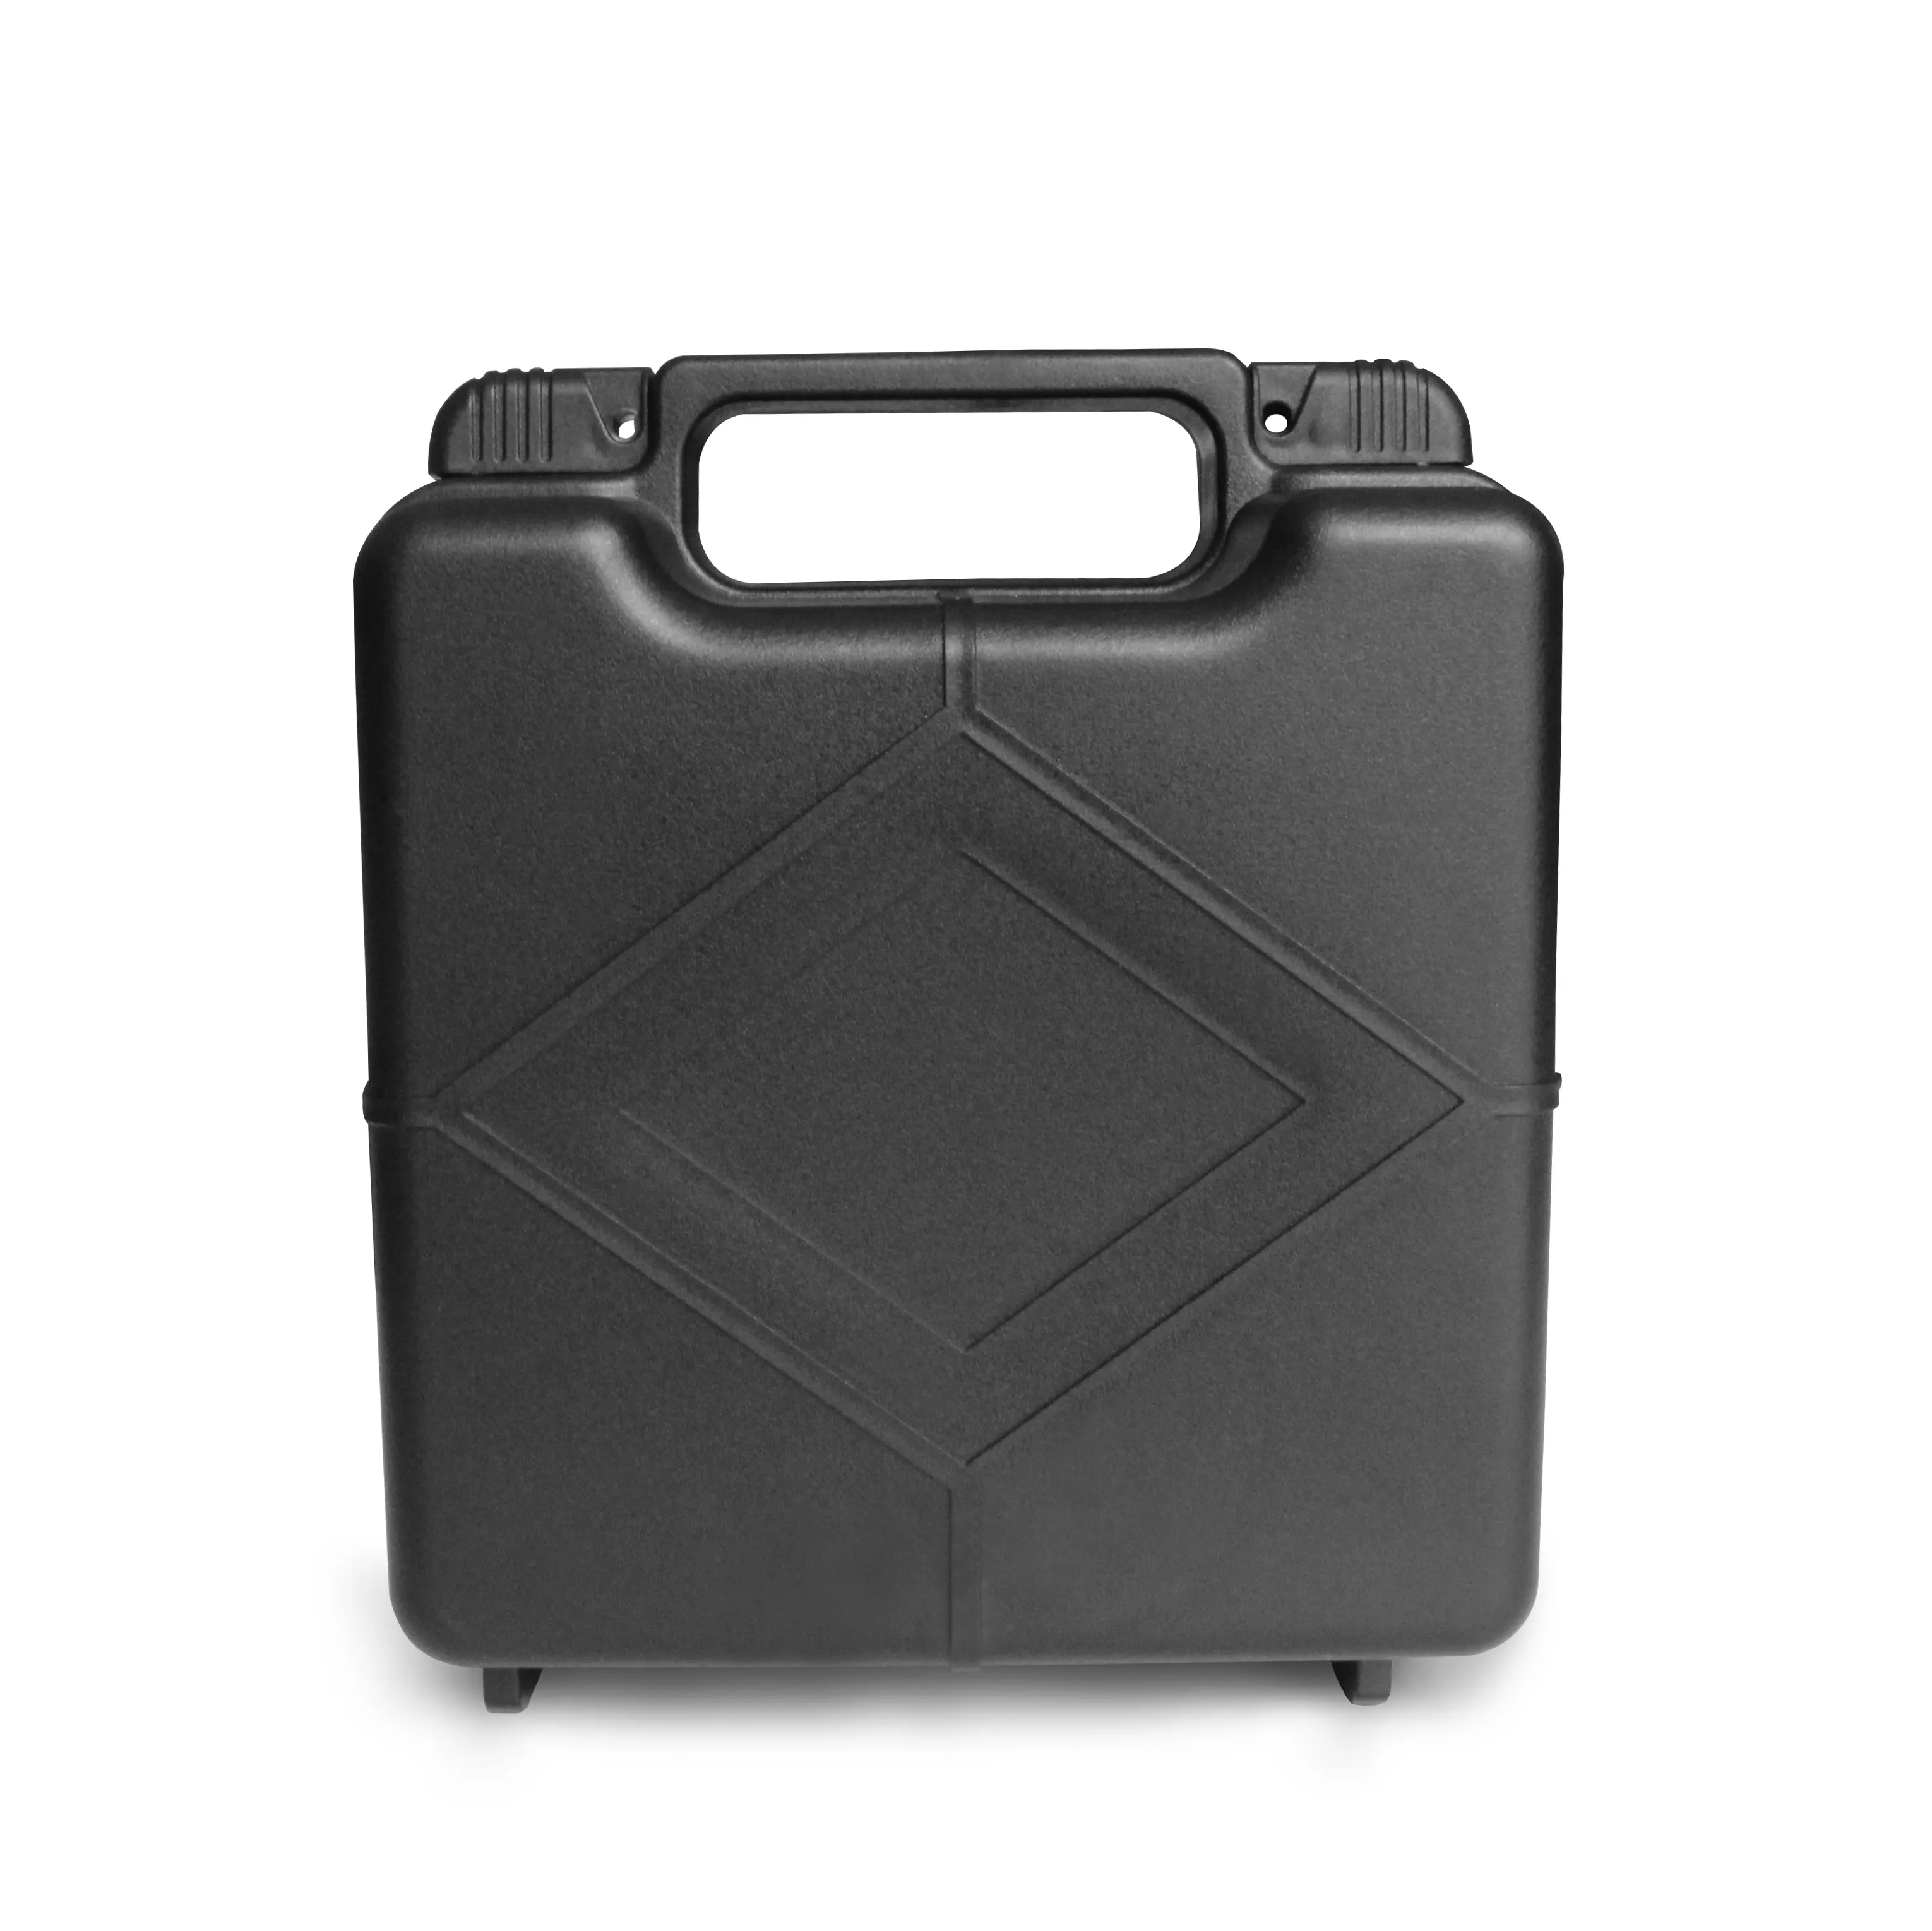 PP-M5121 Small Cheap Plastic Tool Case Hard Plastic Carrying Cases with Foam